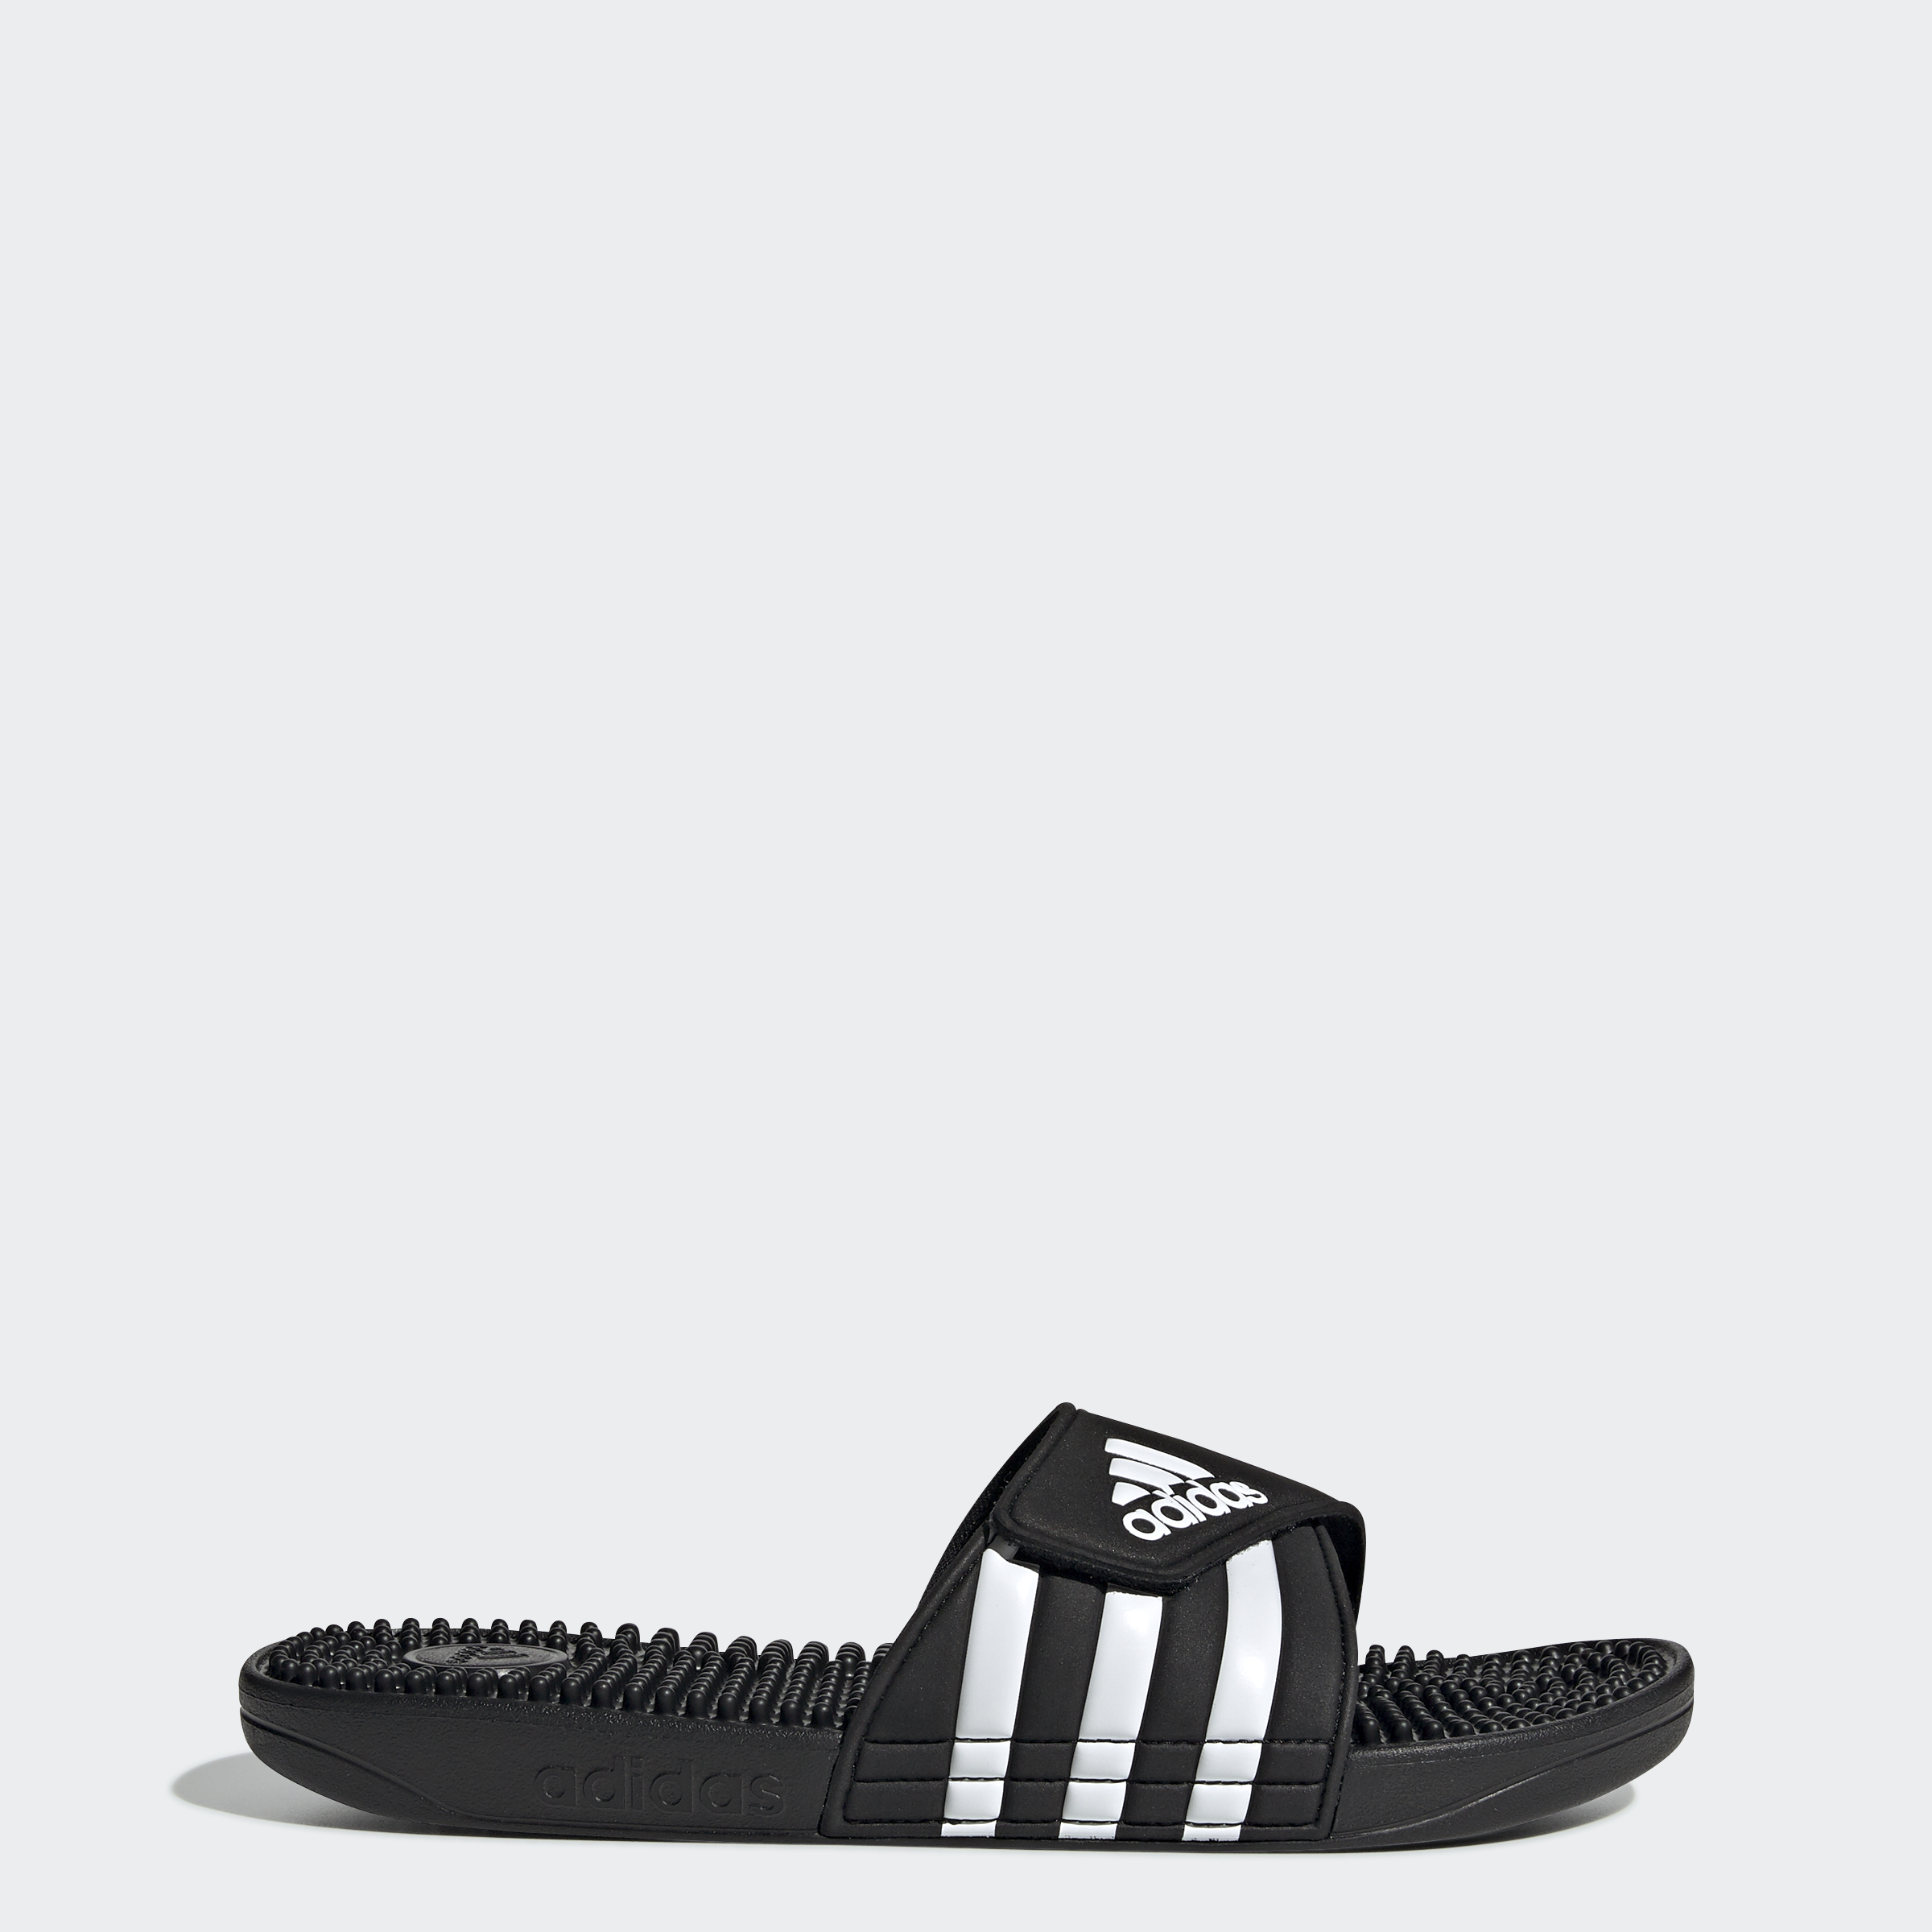 Gama de tienda de comestibles Reembolso adidas Ebay Stacking Codes for Select Items:35% off + 20% off: adidas Men's  Adissage Slide Sandals $12.48, More + free shipping